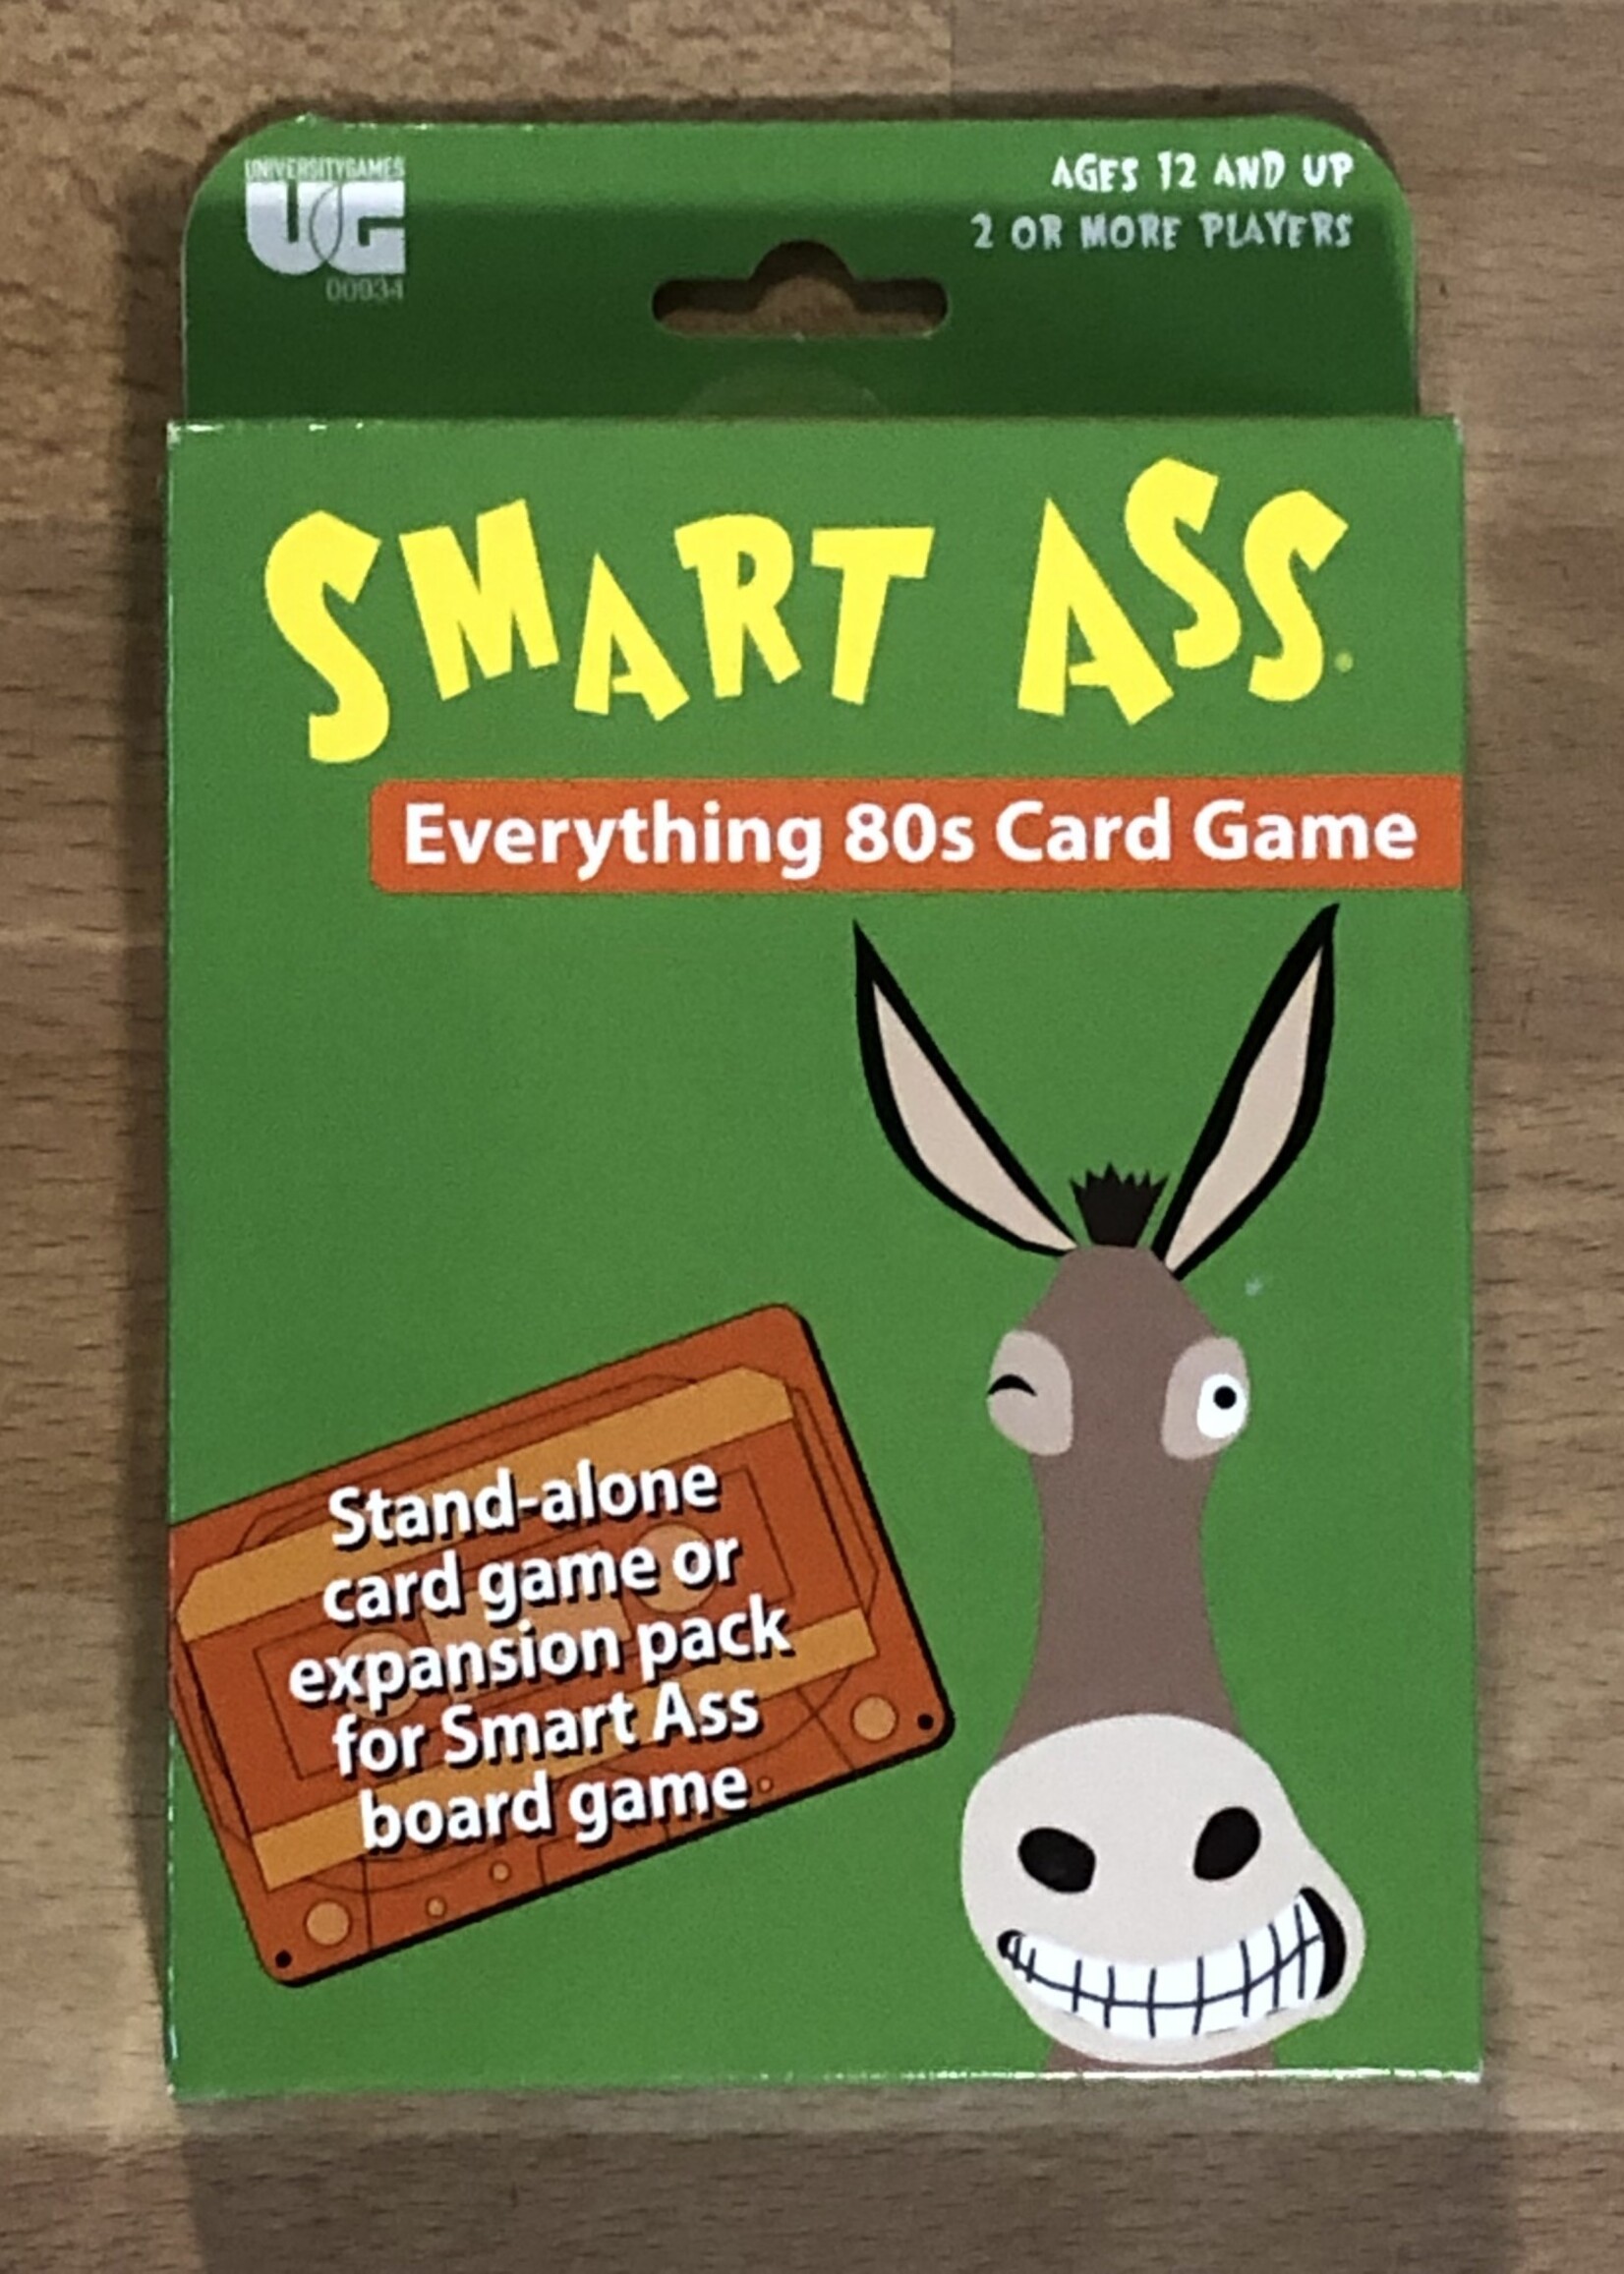 University Games Card Game - Smart Ass: Everything 80s